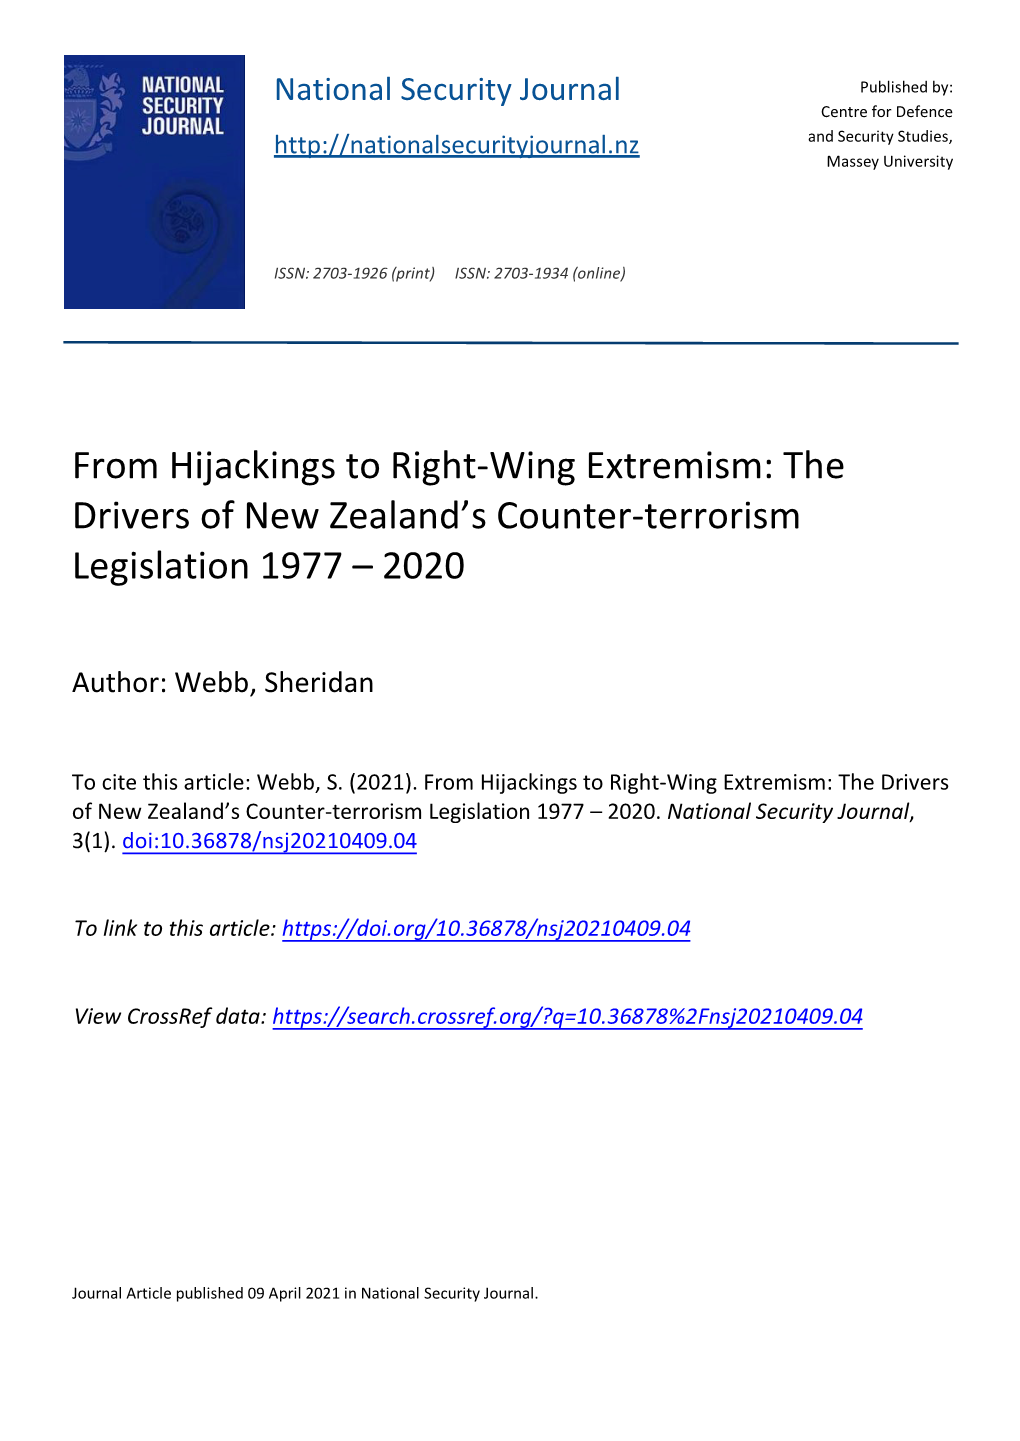 From Hijackings to Right-Wing Extremism: the Drivers of New Zealand’S Counter-Terrorism Legislation 1977 – 2020